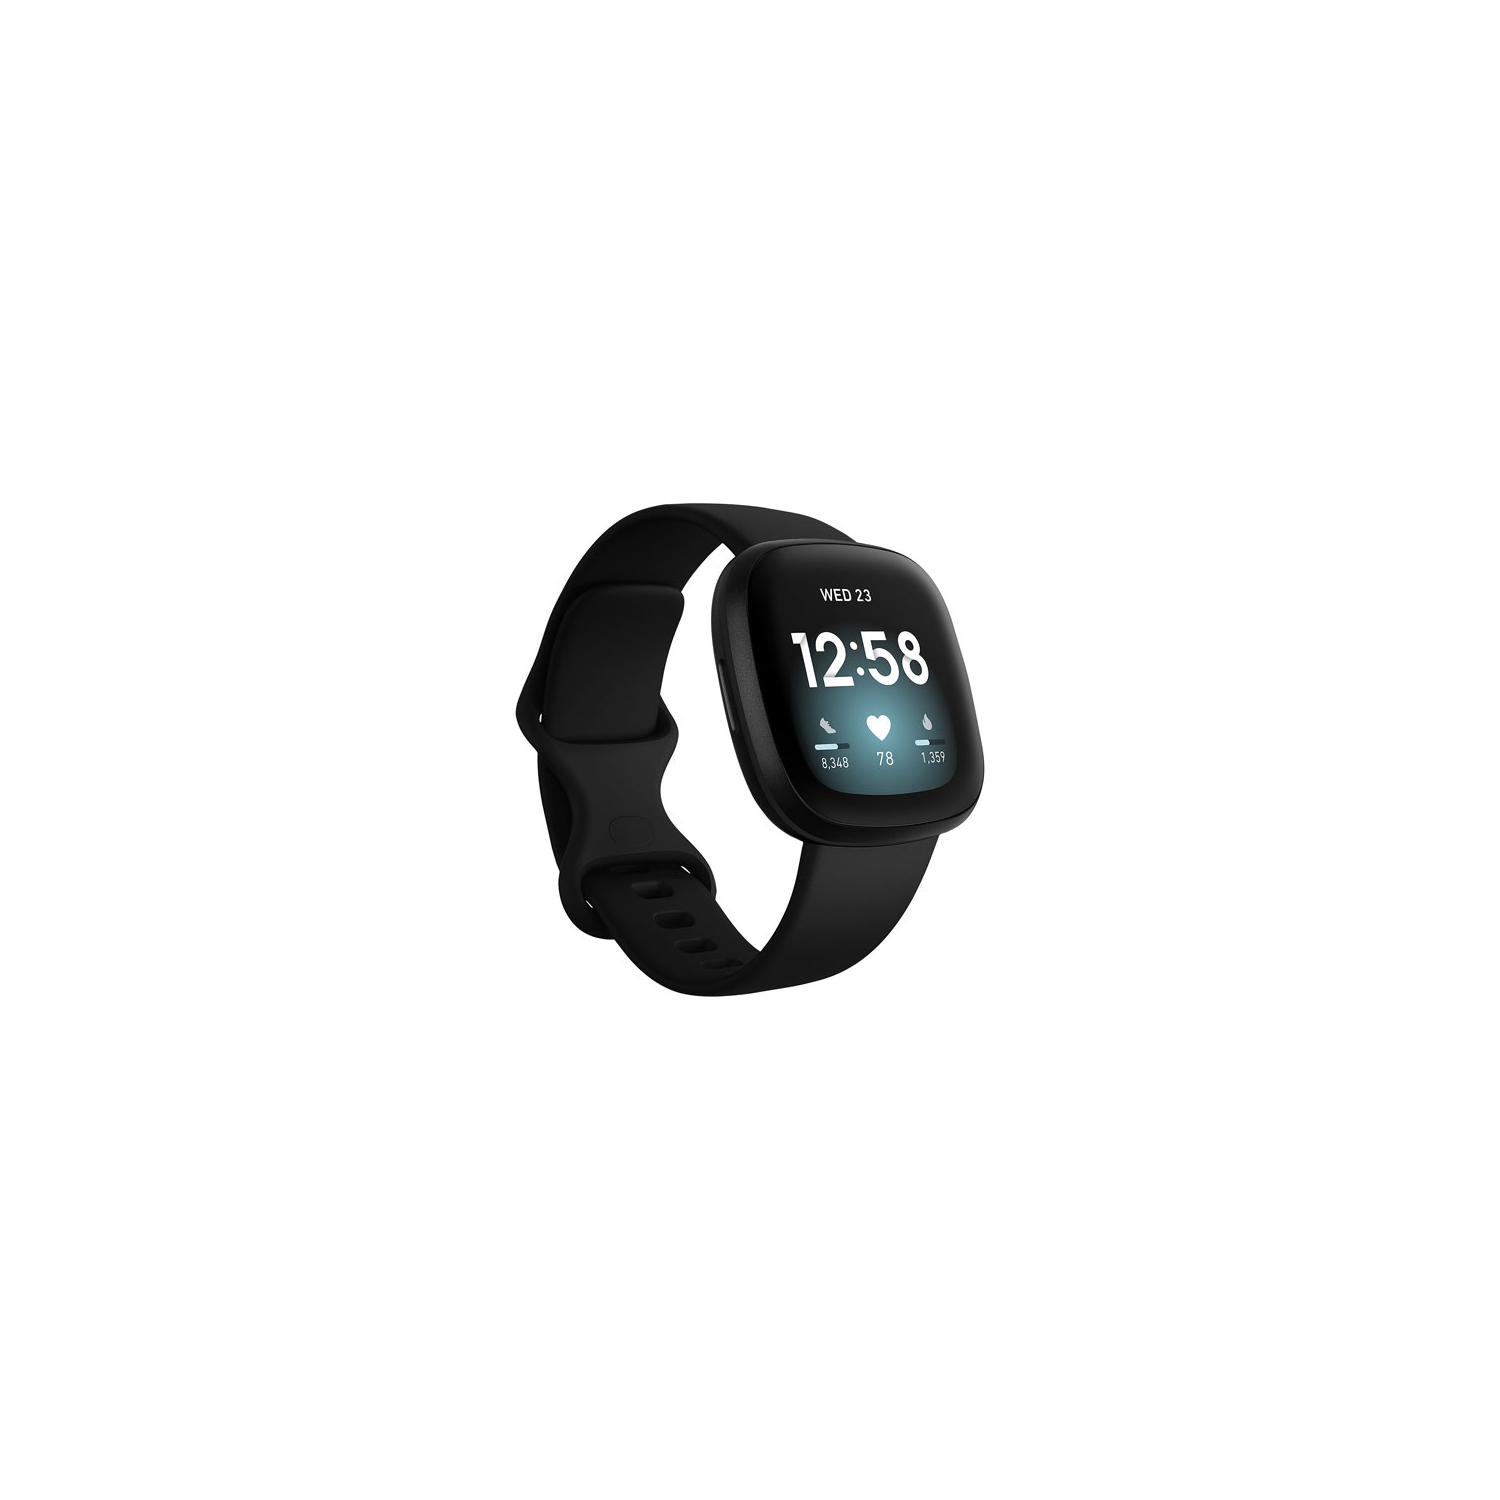 Refurbished (Fair) - Fitbit Versa 3 Smartwatch with Voice Assistant, GPS & 24/7 Heart Rate - Black